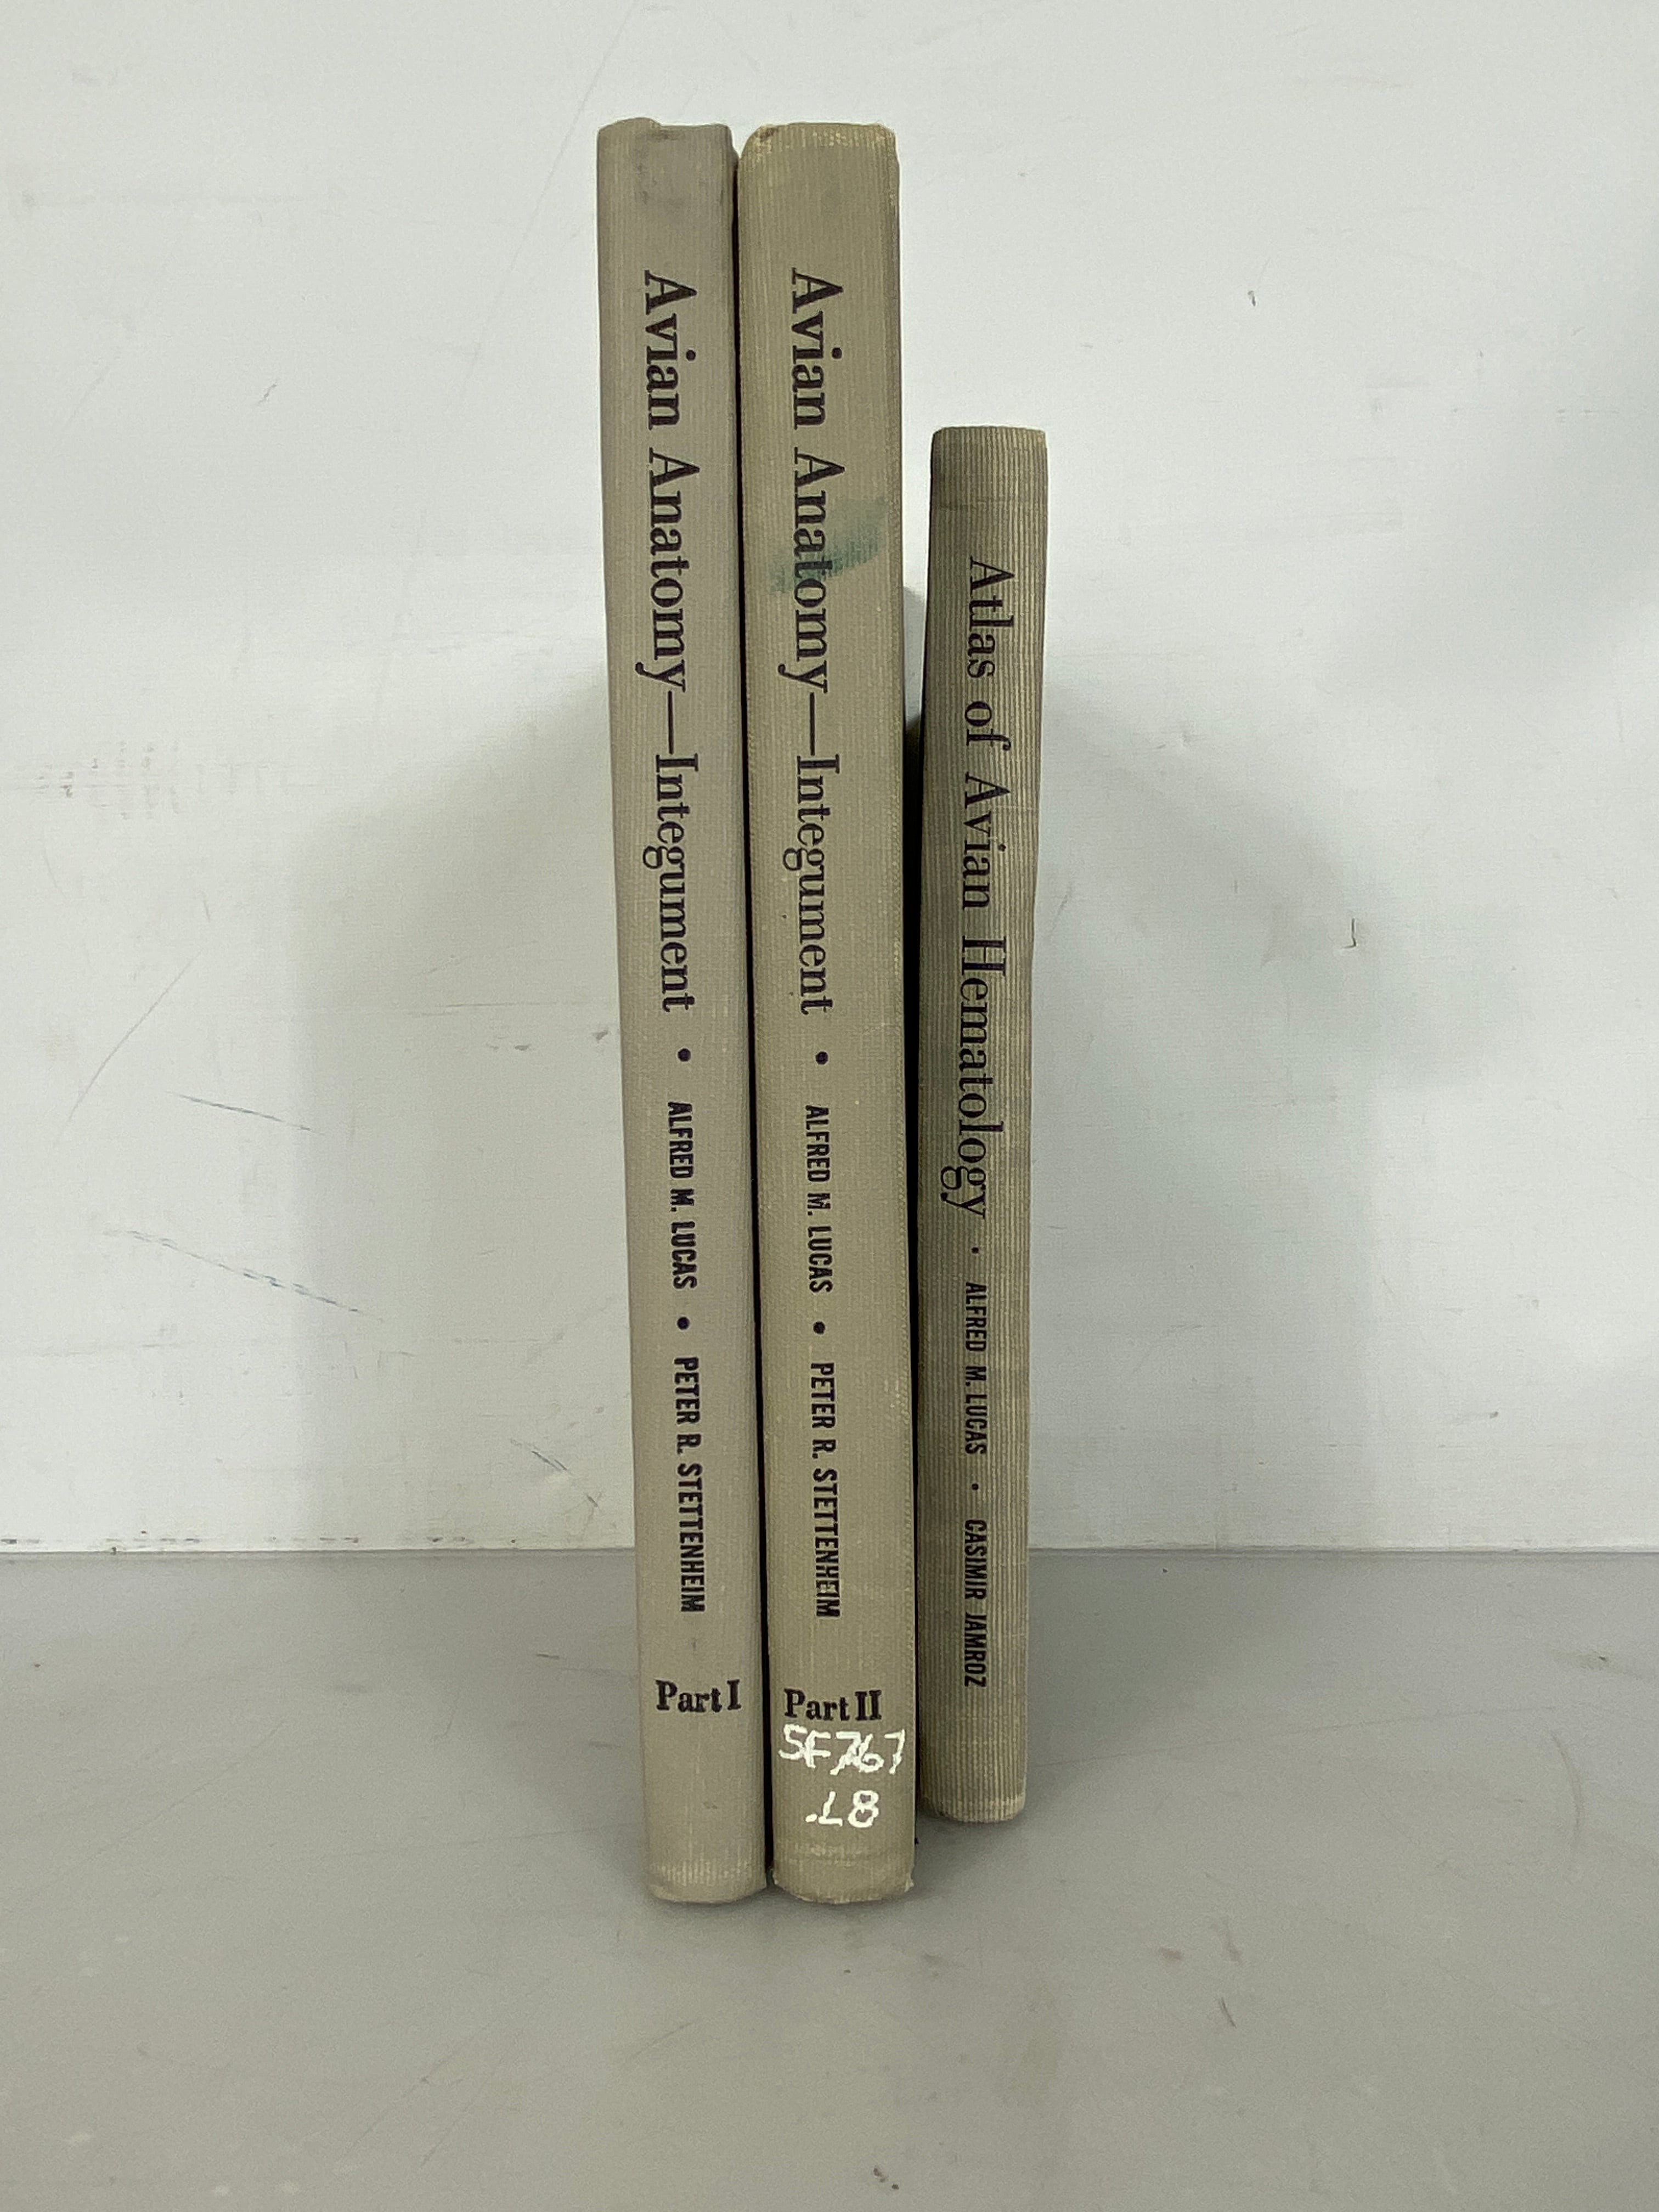 Lot of 3: Avian Anatomy Integument Part I and II and Atlas of Avian Hematology U.S. Department of Agriculture 1961-1972 HC